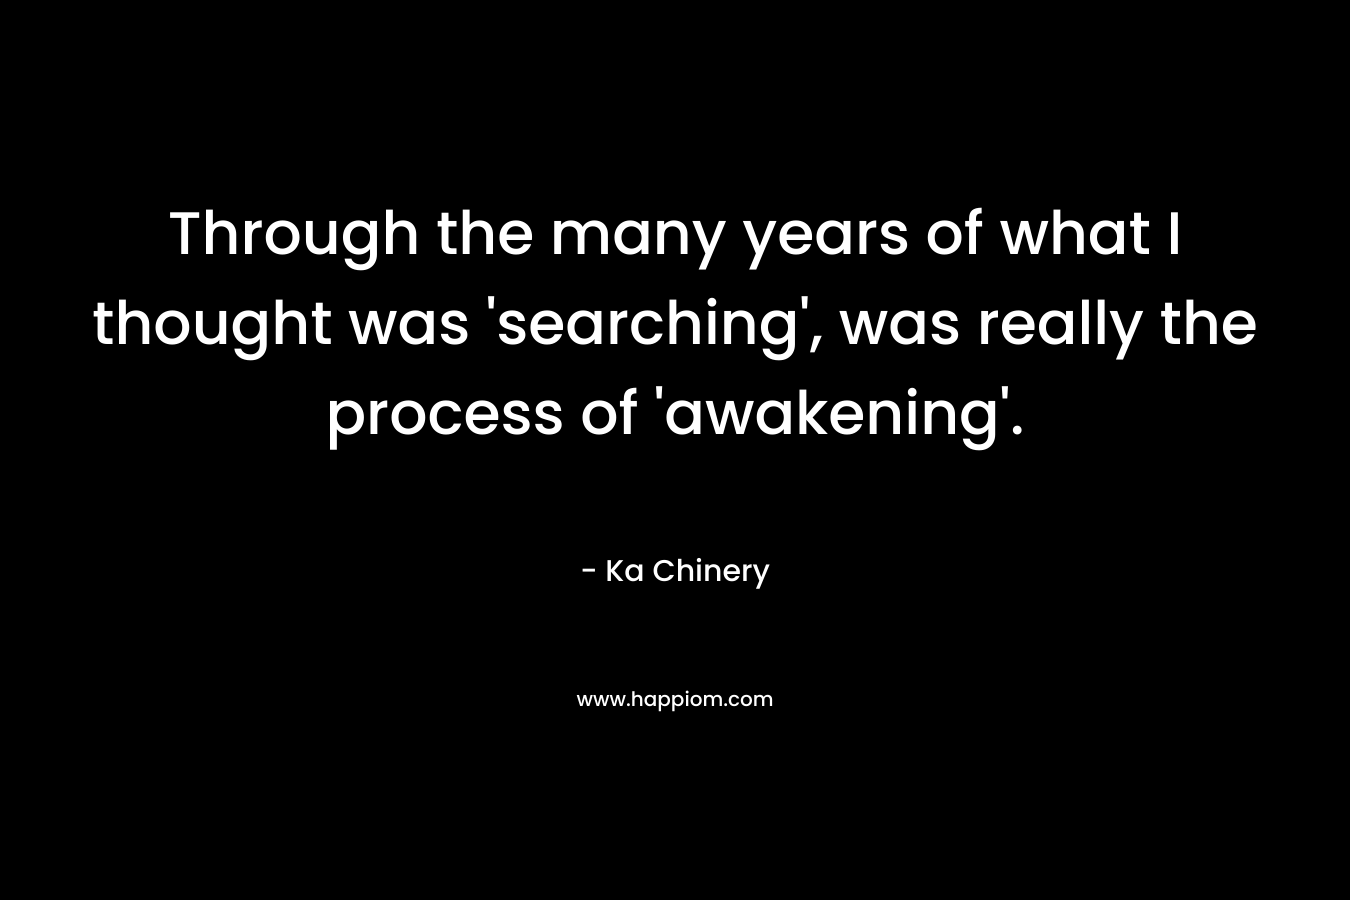 Through the many years of what I thought was 'searching', was really the process of 'awakening'.